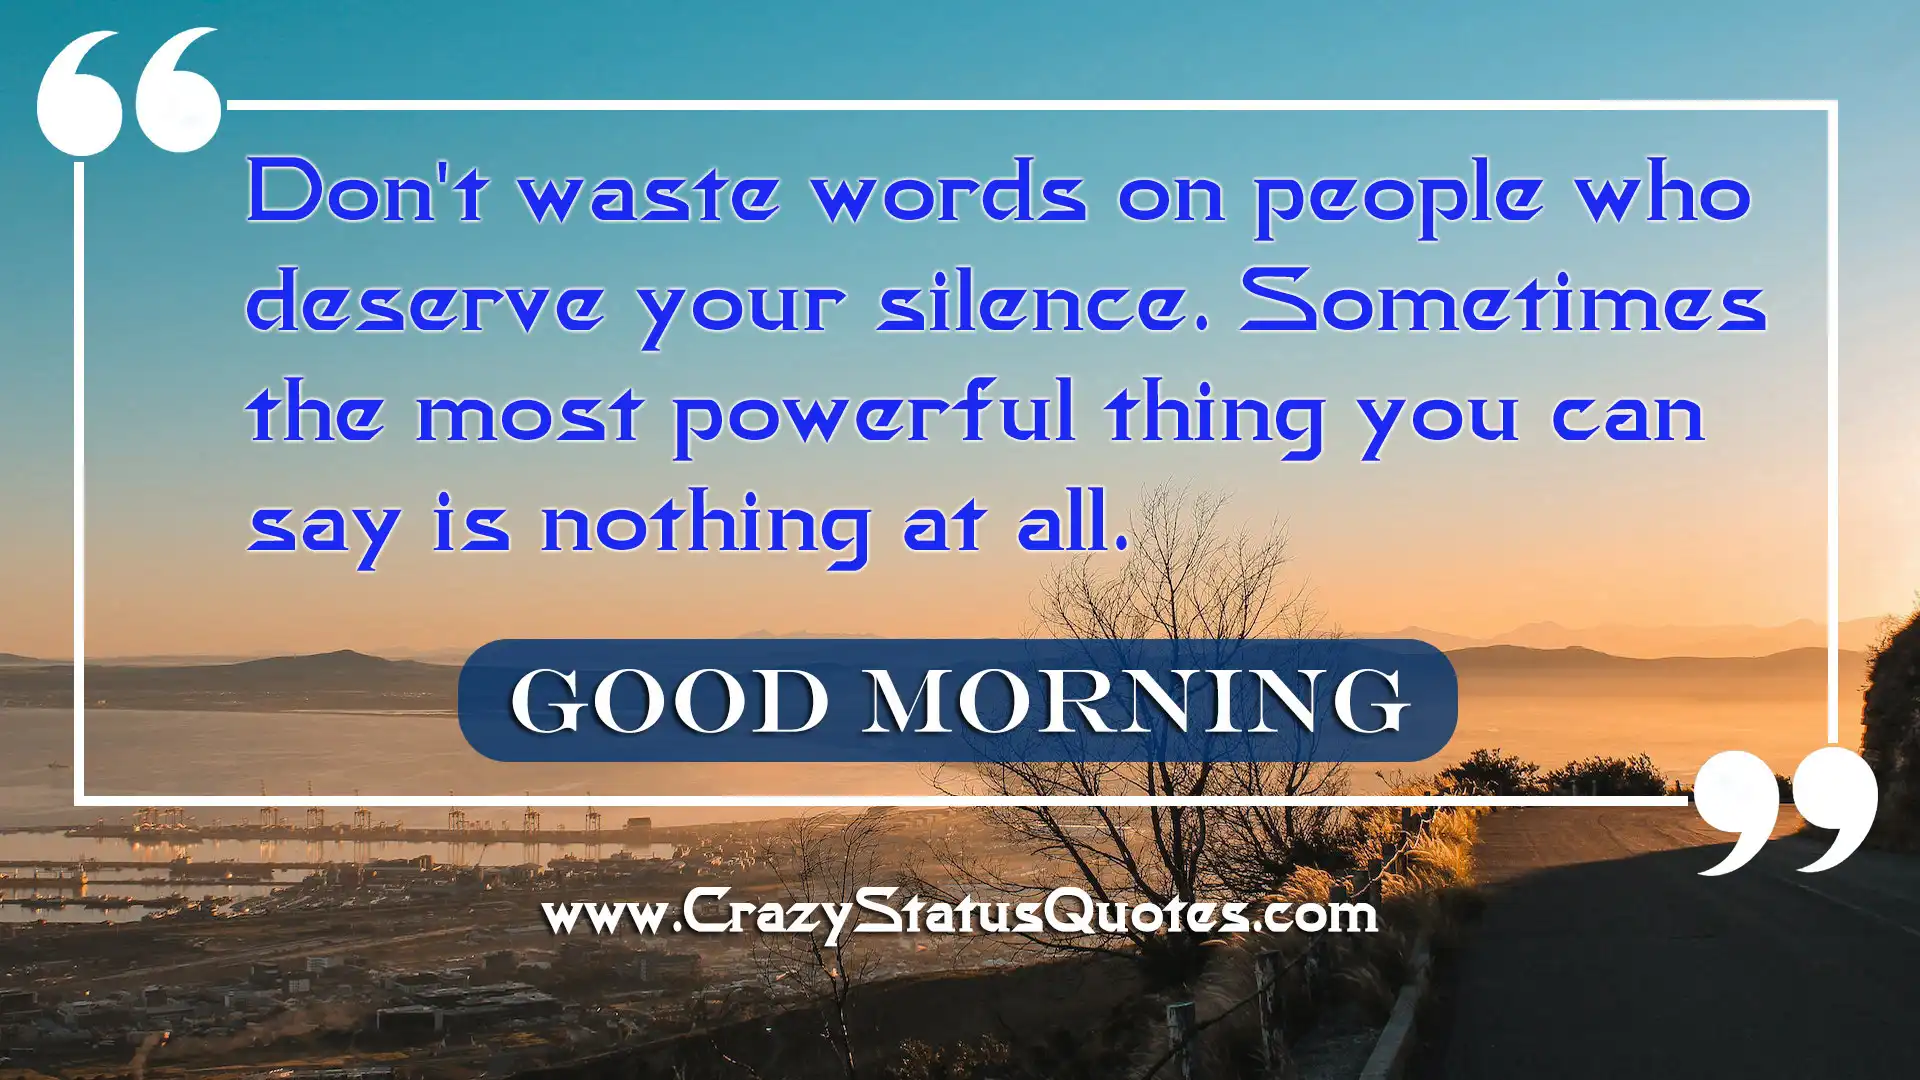 Don't waste words on people who deserve your silence. Sometimes the most powerful thing you can say is nothing at all